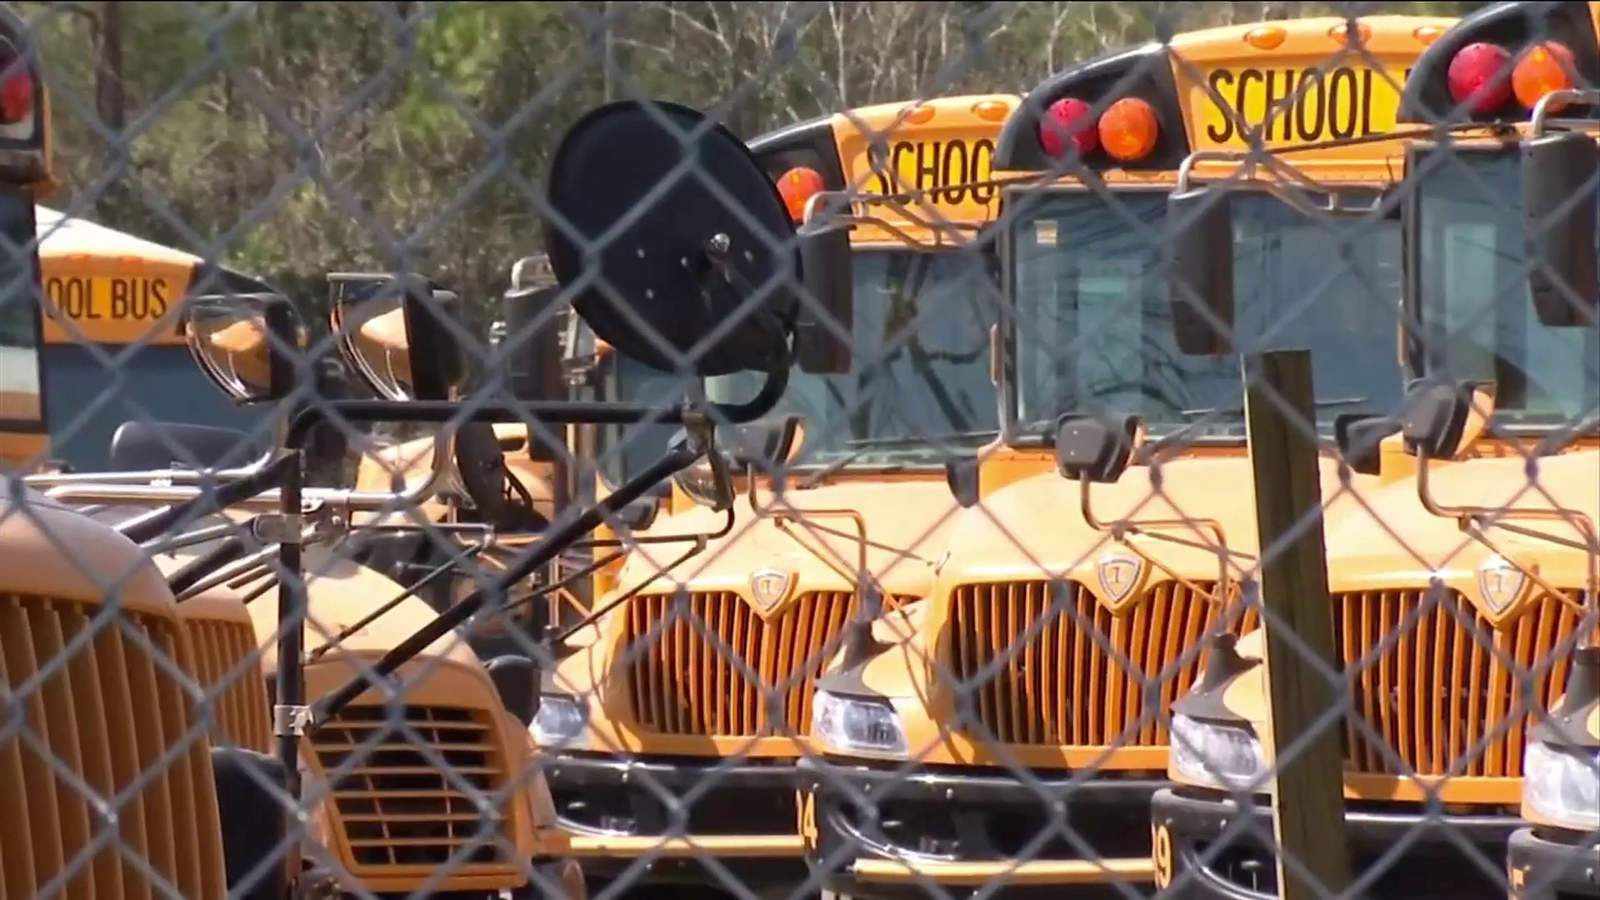 Some Florida teachers will get vaccine priority. School bus drivers want to be included